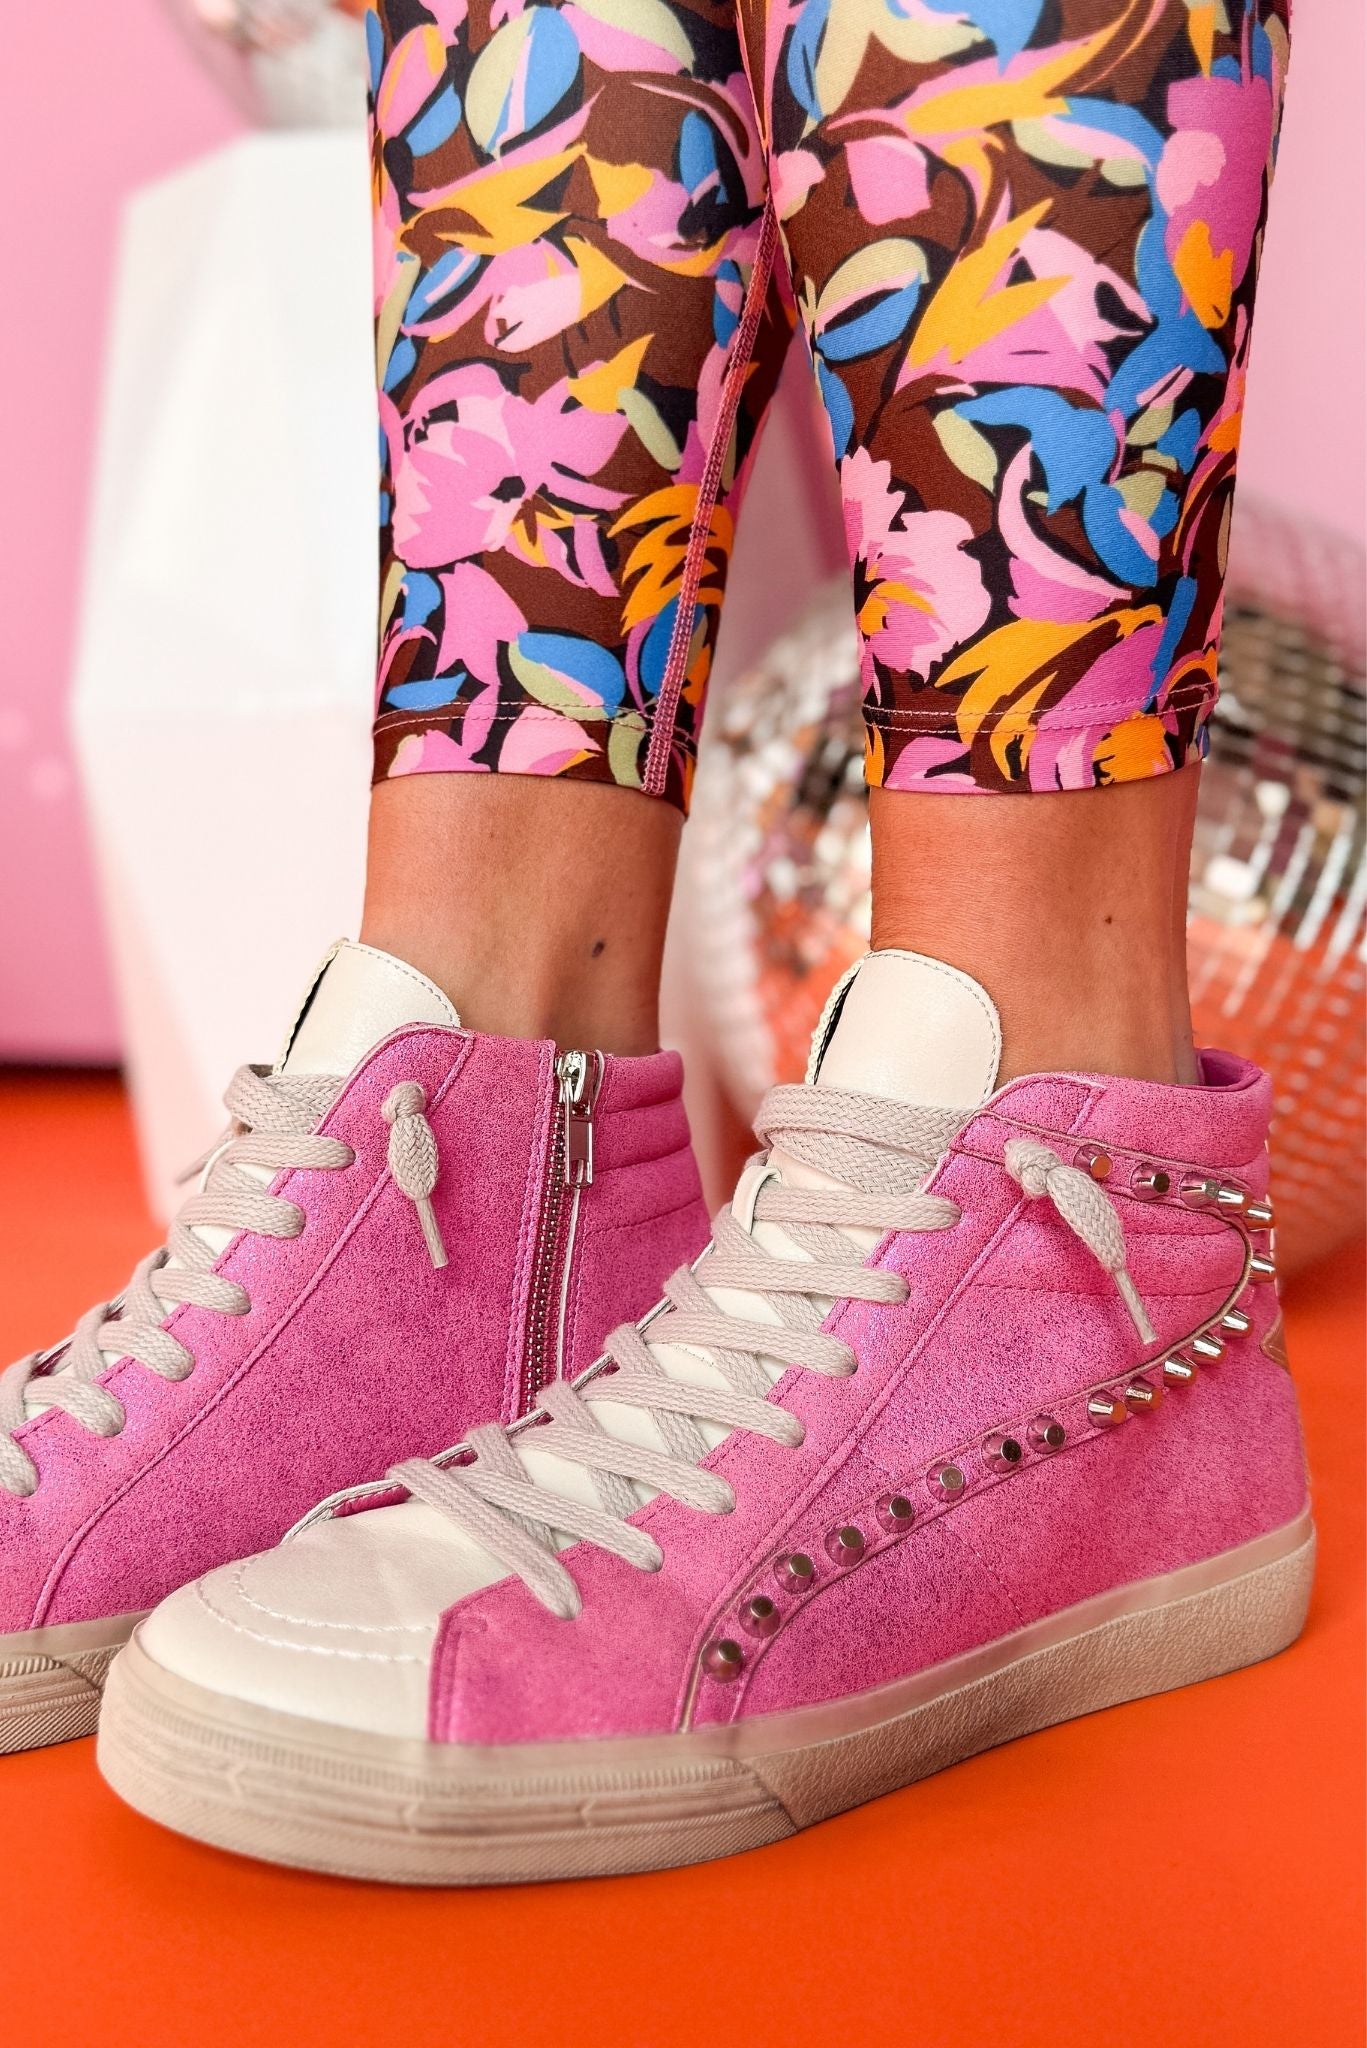 Shu Shop Bright Pink Metallic Stud Star High Top Sneaker, shoes, sneakers, pink sneakers, studded sneakers, must have shoes, shop style your senses by mallory fitzsimmons, ssys by mallory fitzsimmons